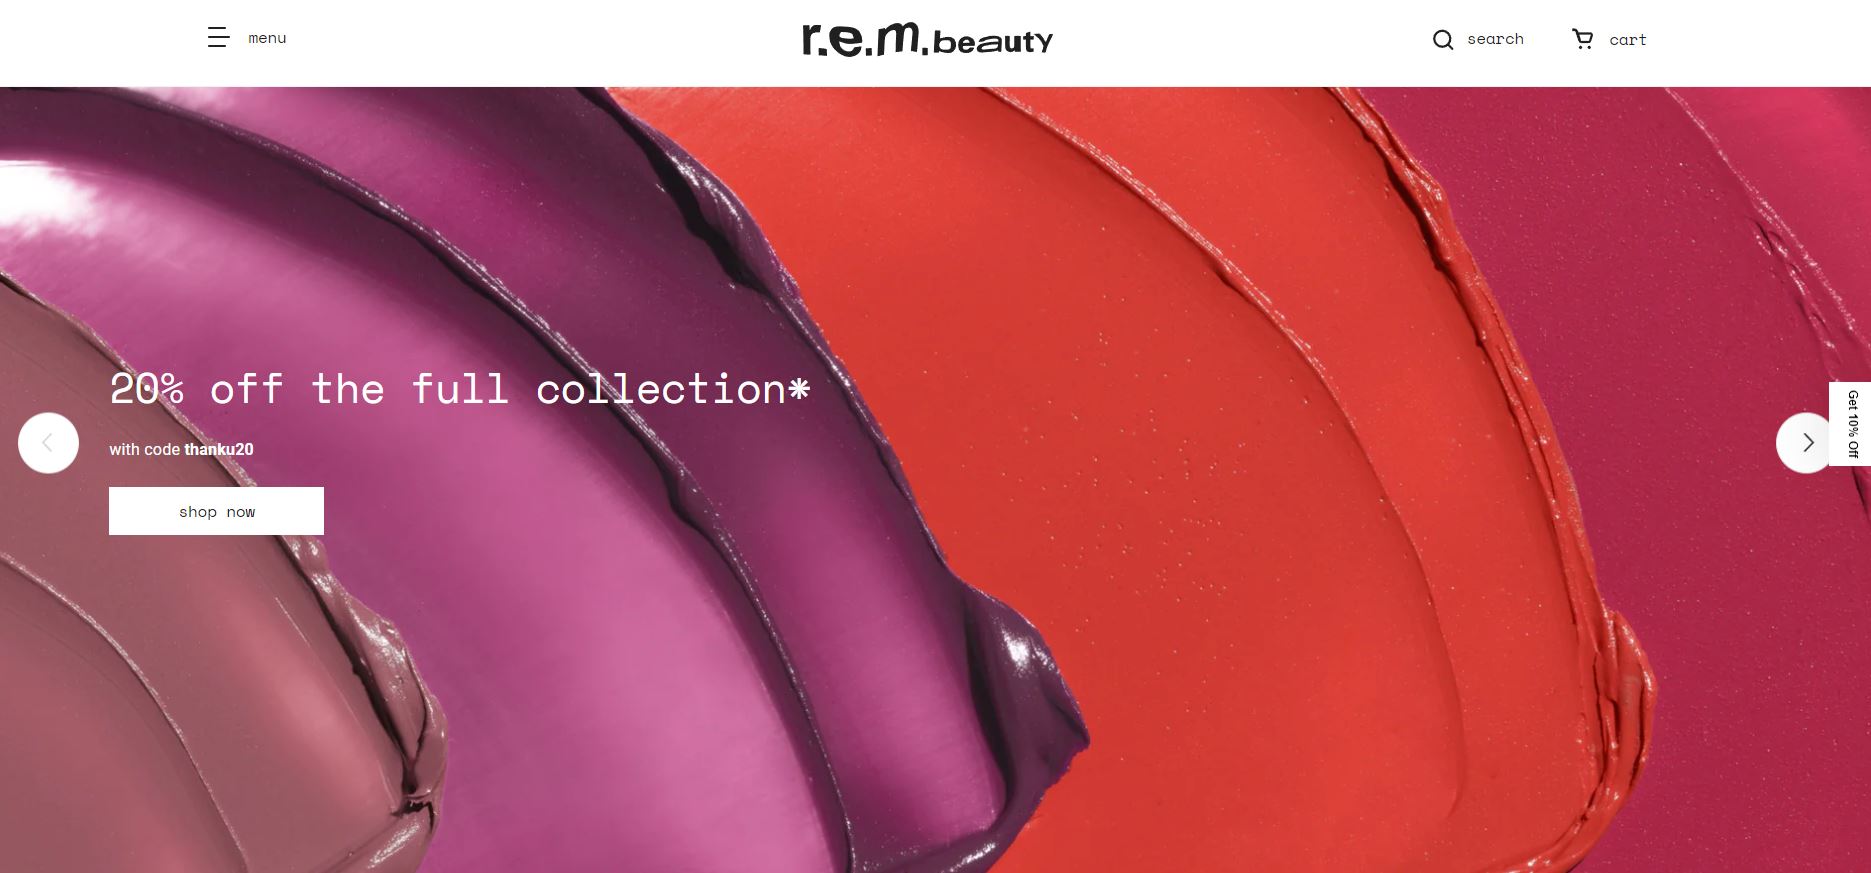 Welcome to r.e.m. beauty, the enchanting startup founded by Michelle Shigemasa and backed by Sandbridge Capital.